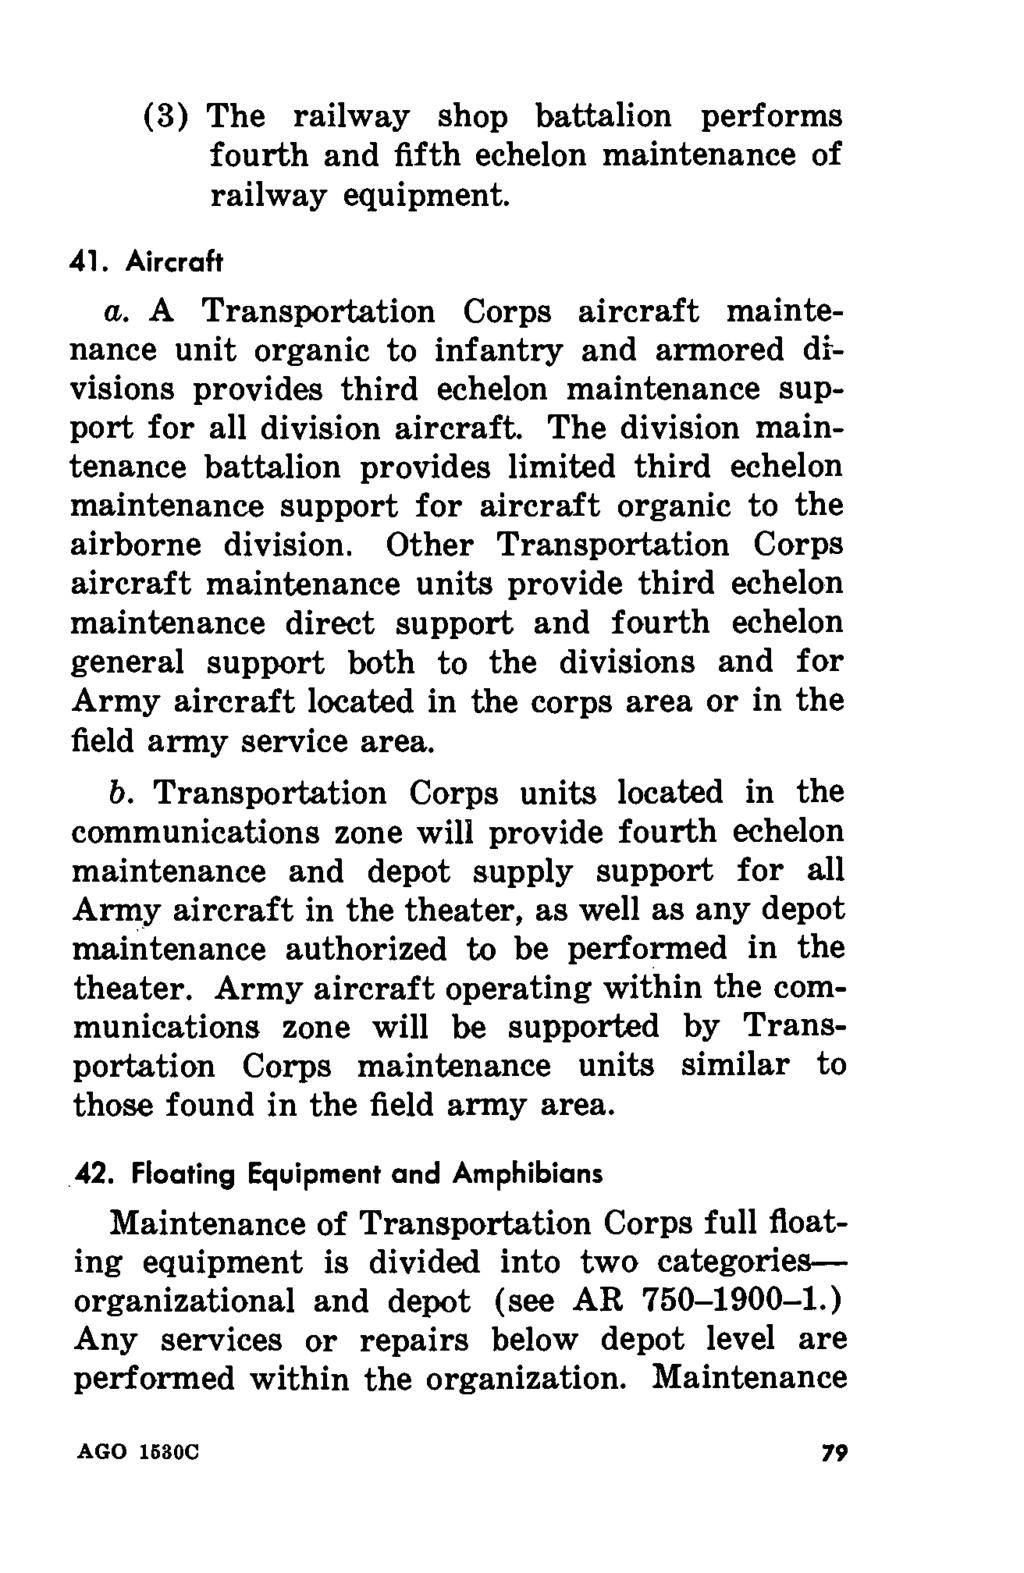 (3) The railway shop battalion performs fourth and fifth echelon maintenance of railway equipment. 41. Aircraft a. A Transportation Corps aircraft maintenance unit organic to infantry and armored d.